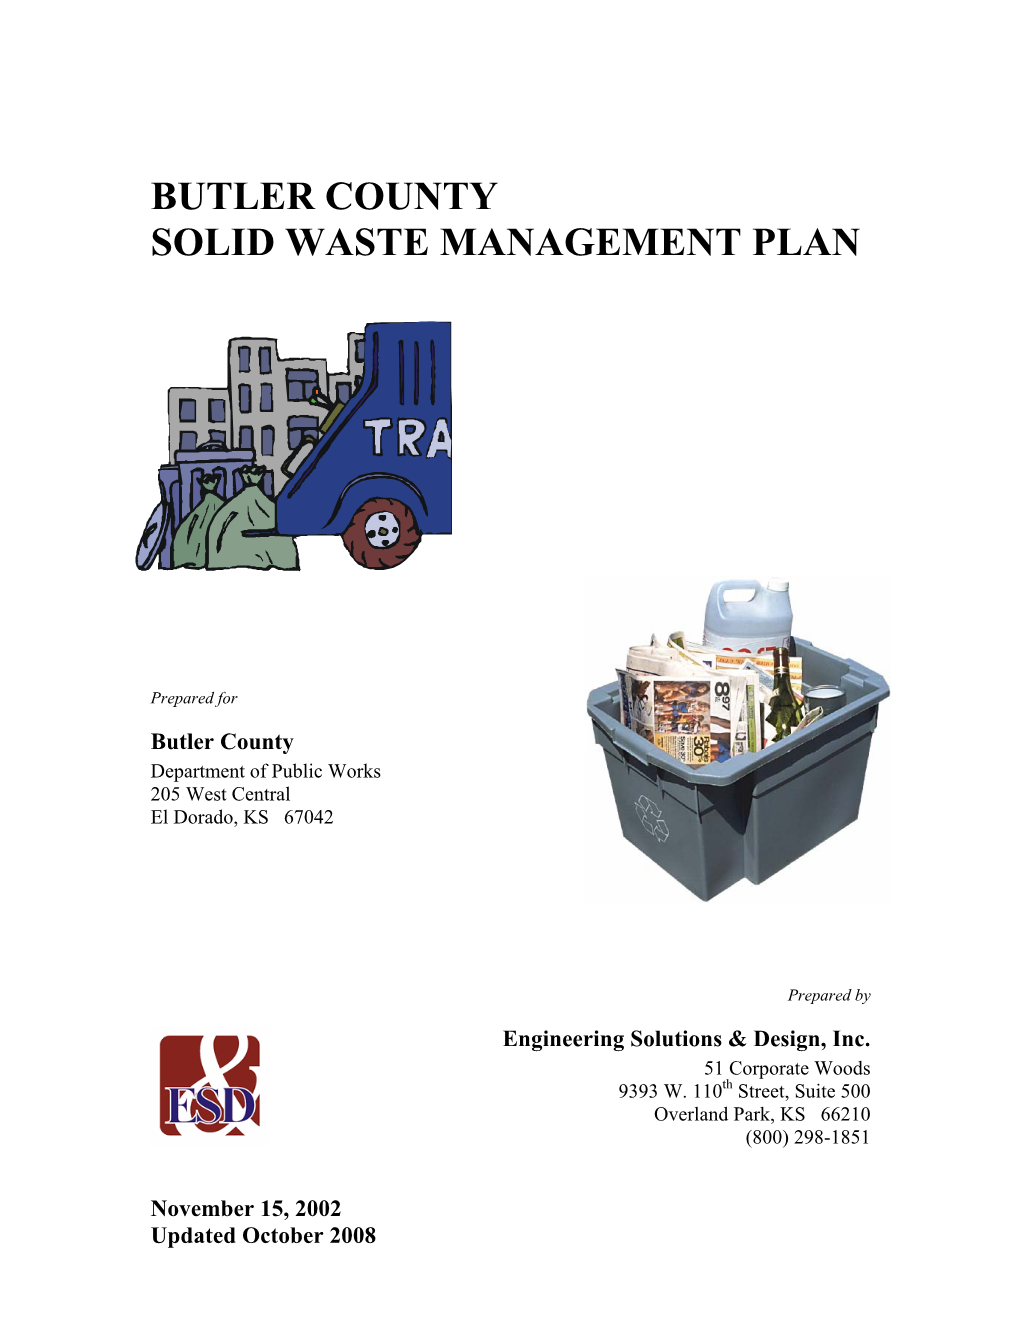 Butler County Solid Waste Management Plan